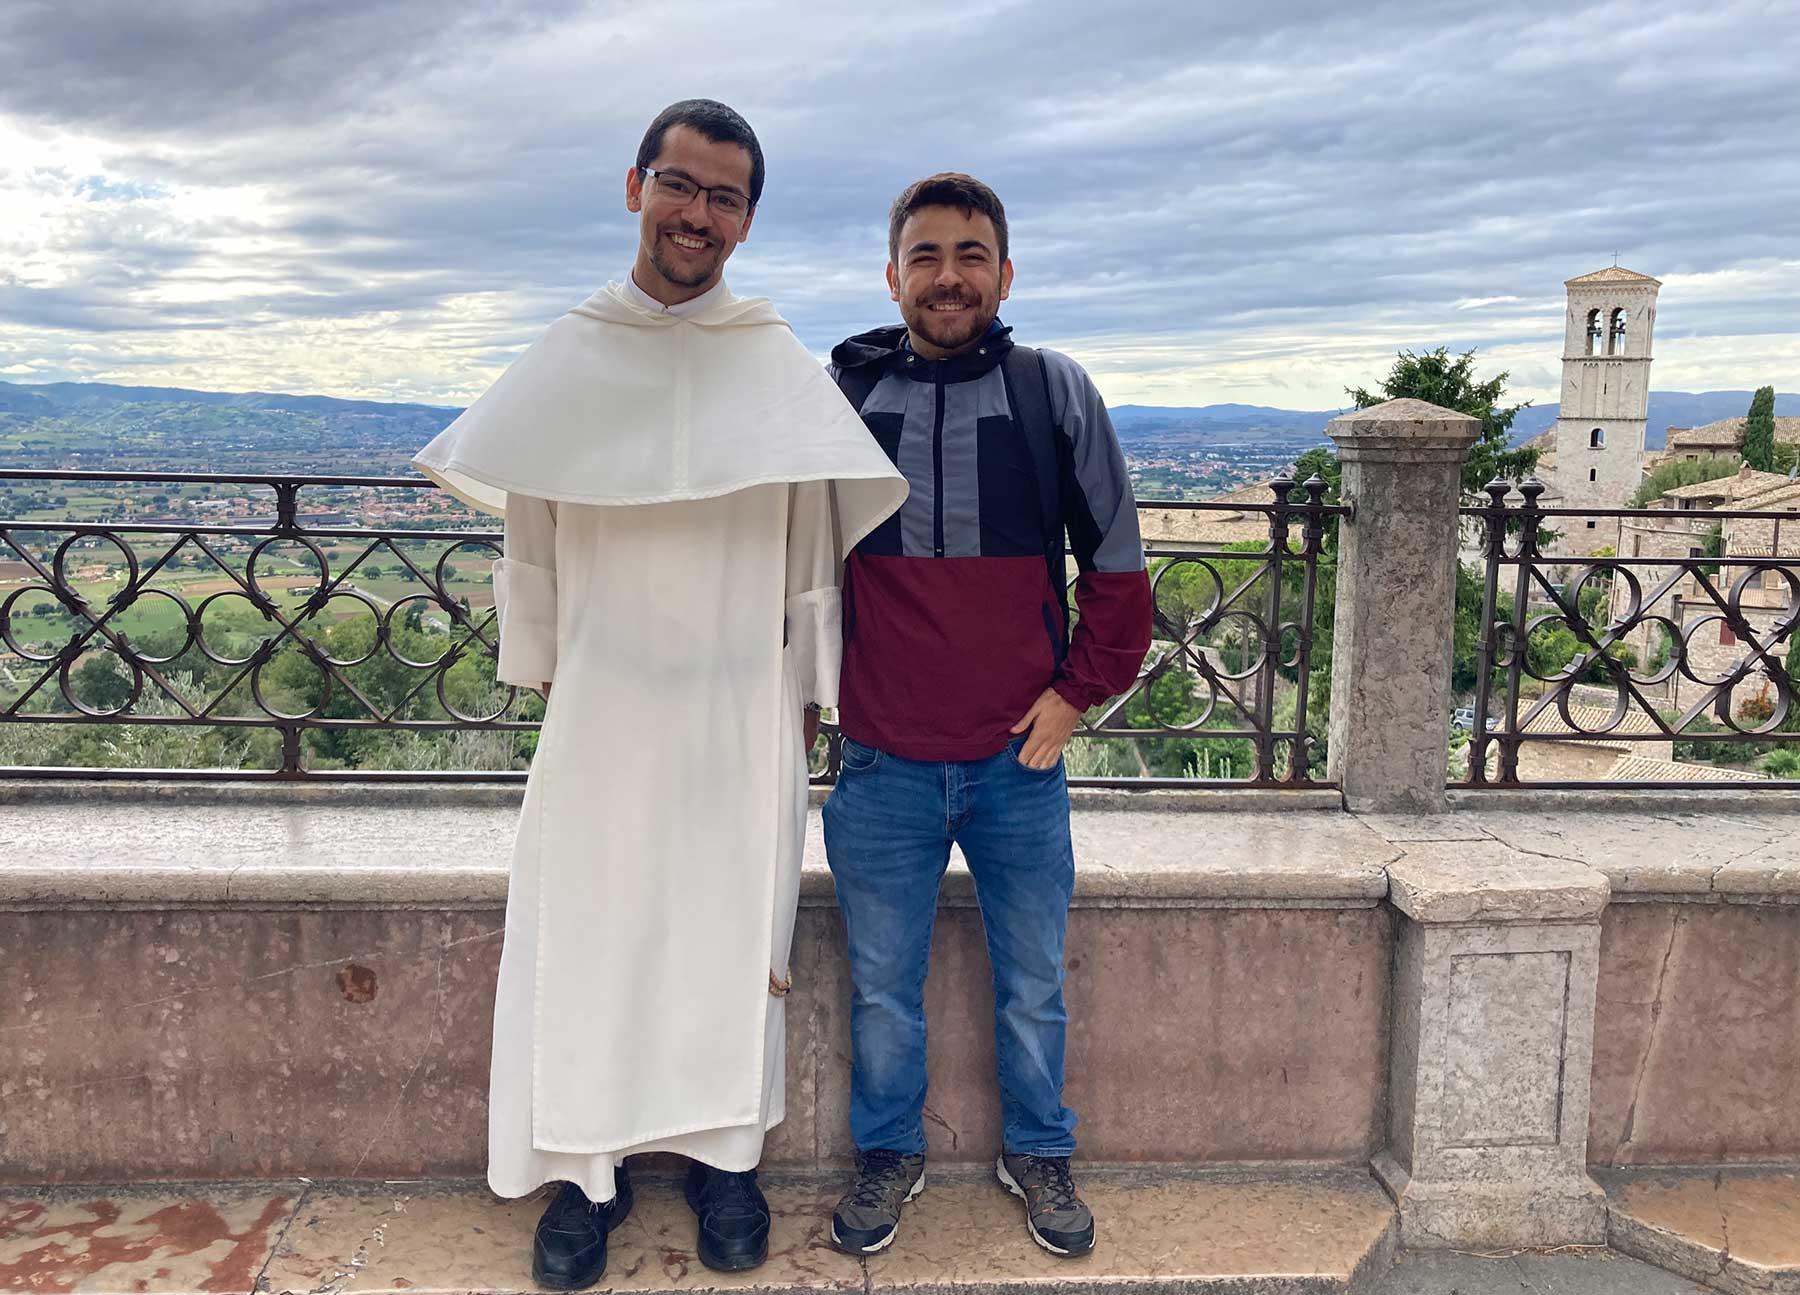 Humberto Partida poses with a priest on a balcony overlooking the city of Florence, Italy.